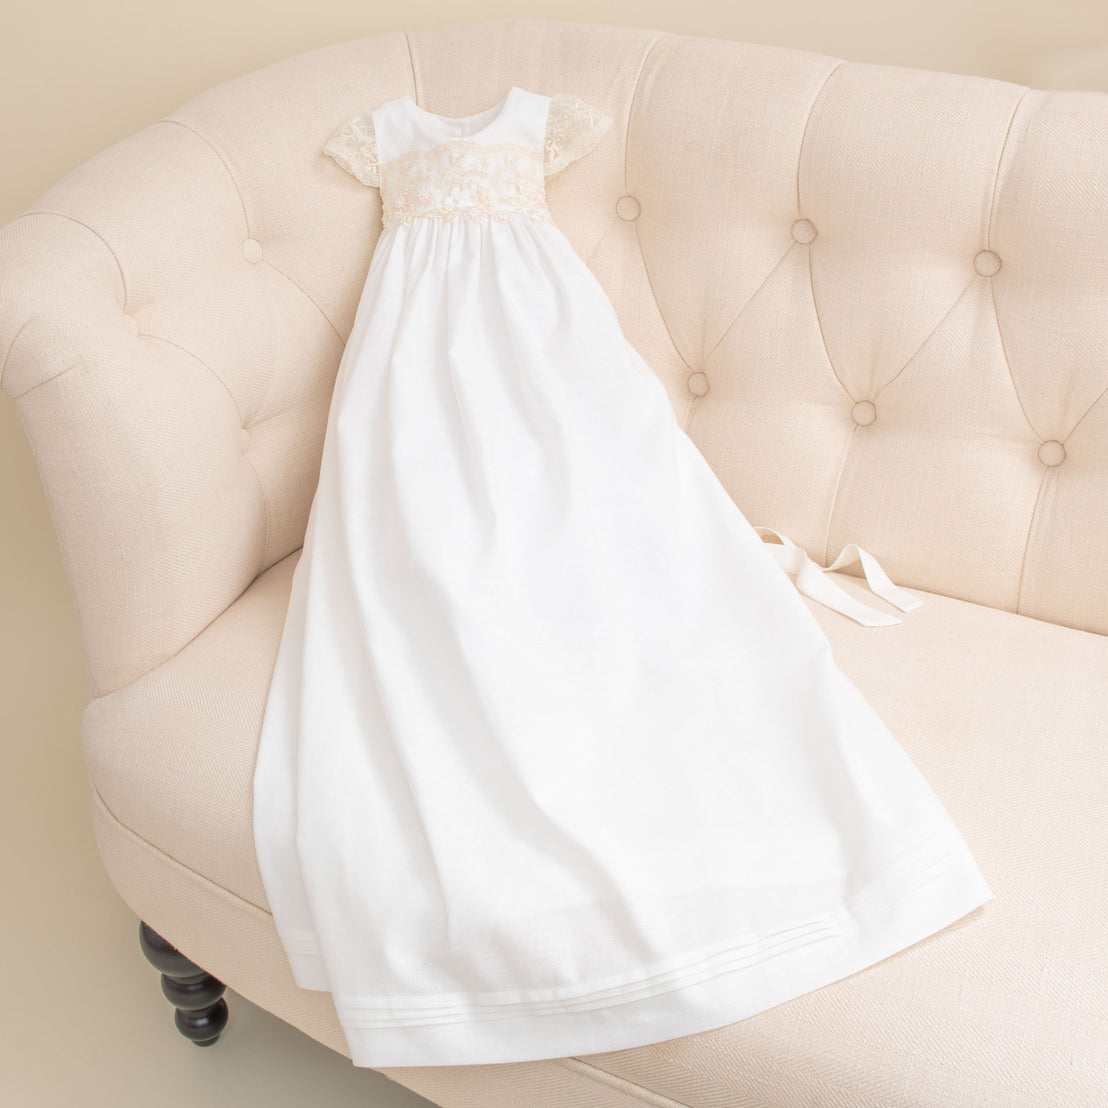 A white, elegant Jessica Linen Gown with vintage lace detailing on the bodice hangs on an upholstered beige tufted armchair in a soft, well-lit room.